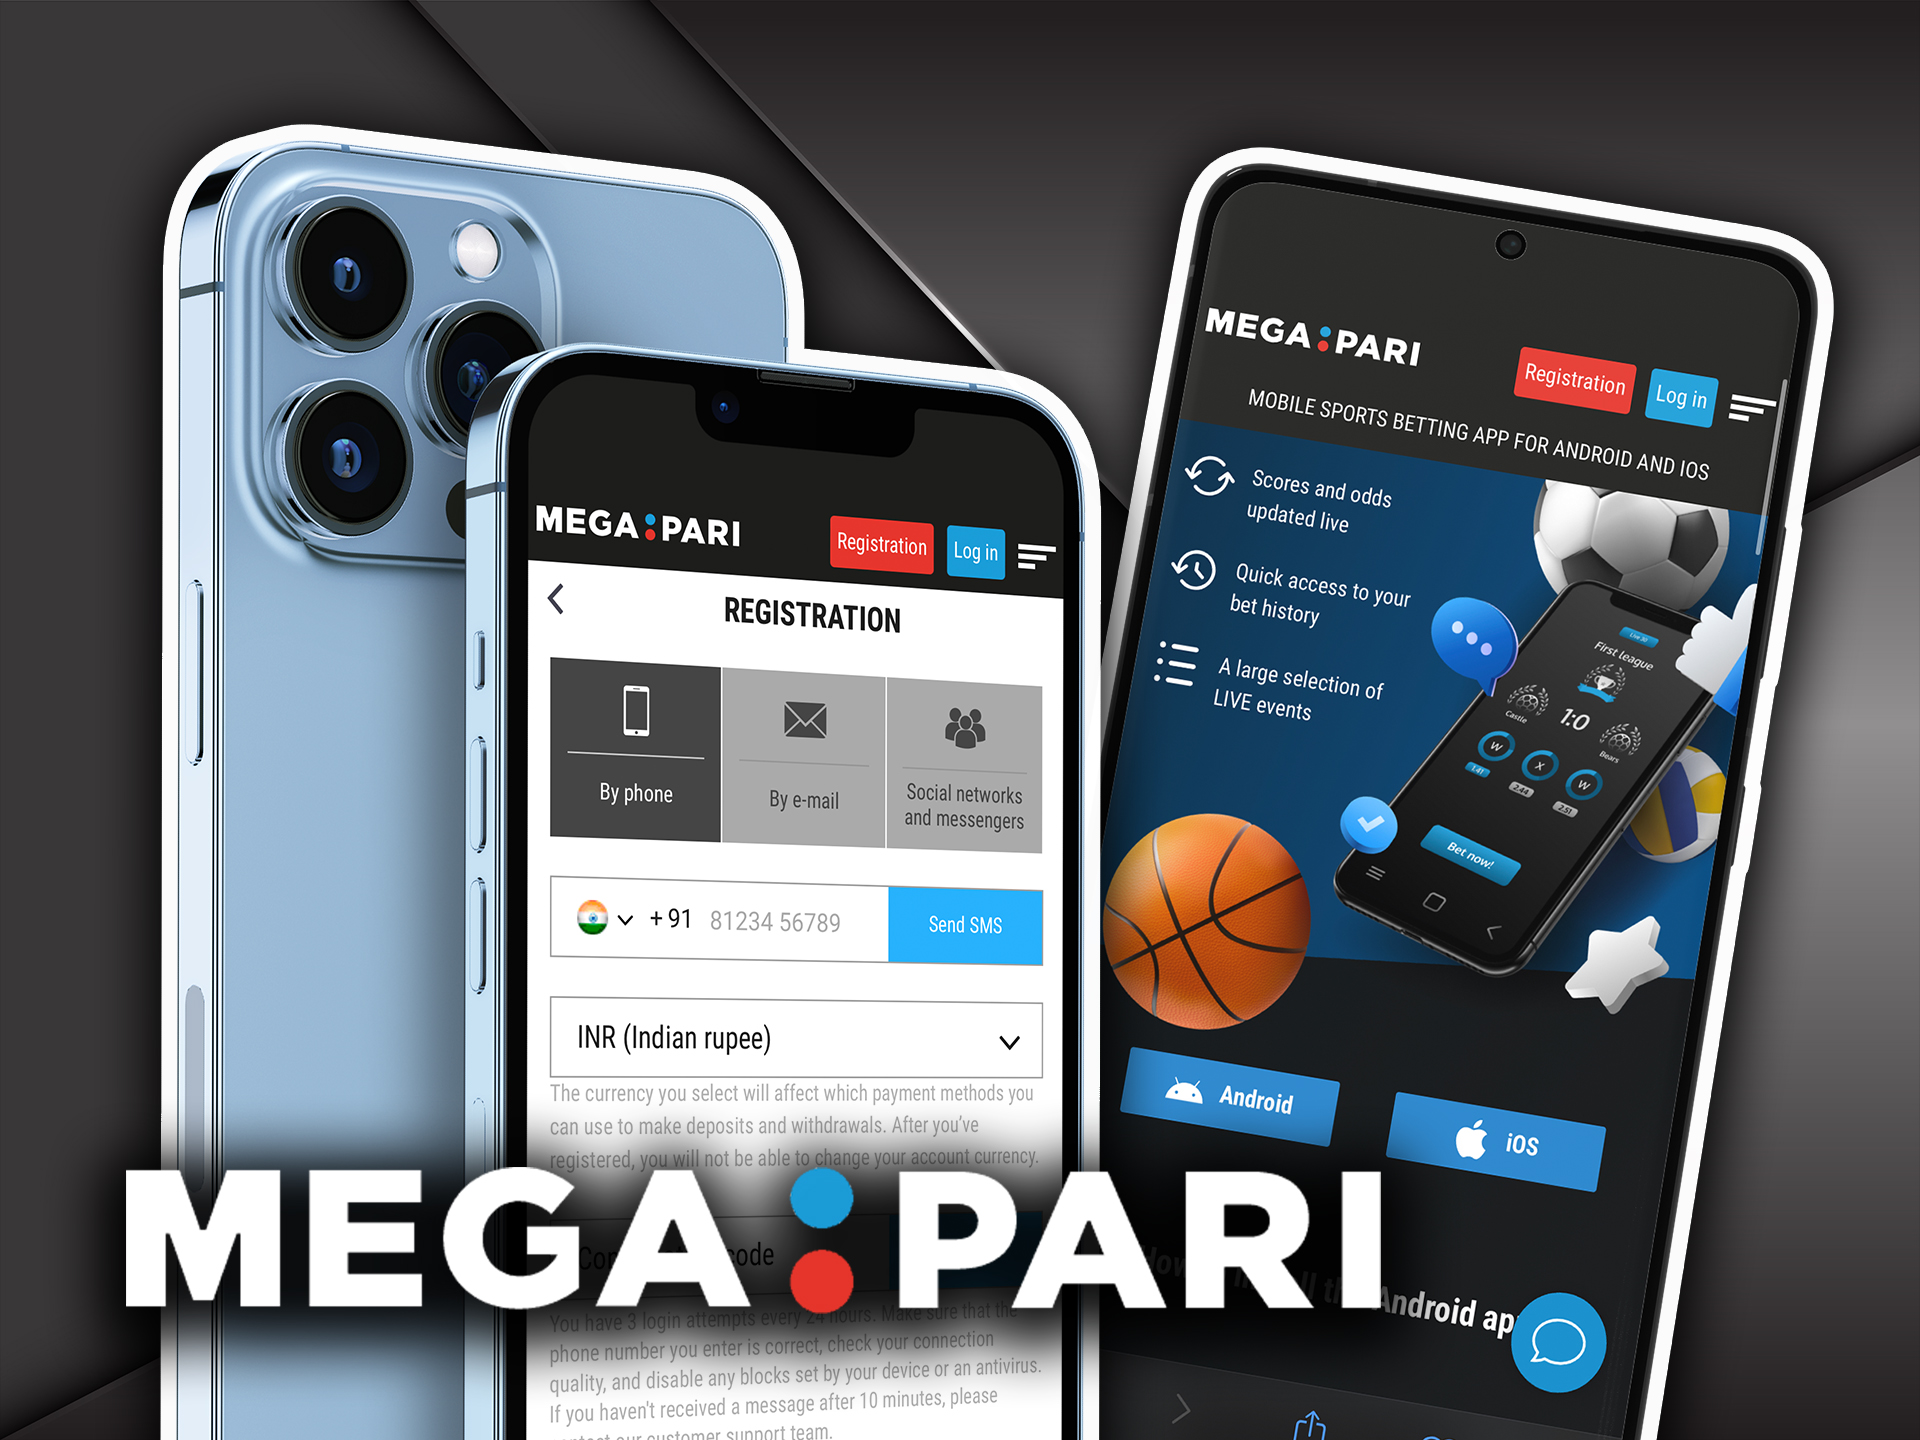 Enter on Megapari registration page and make new account.